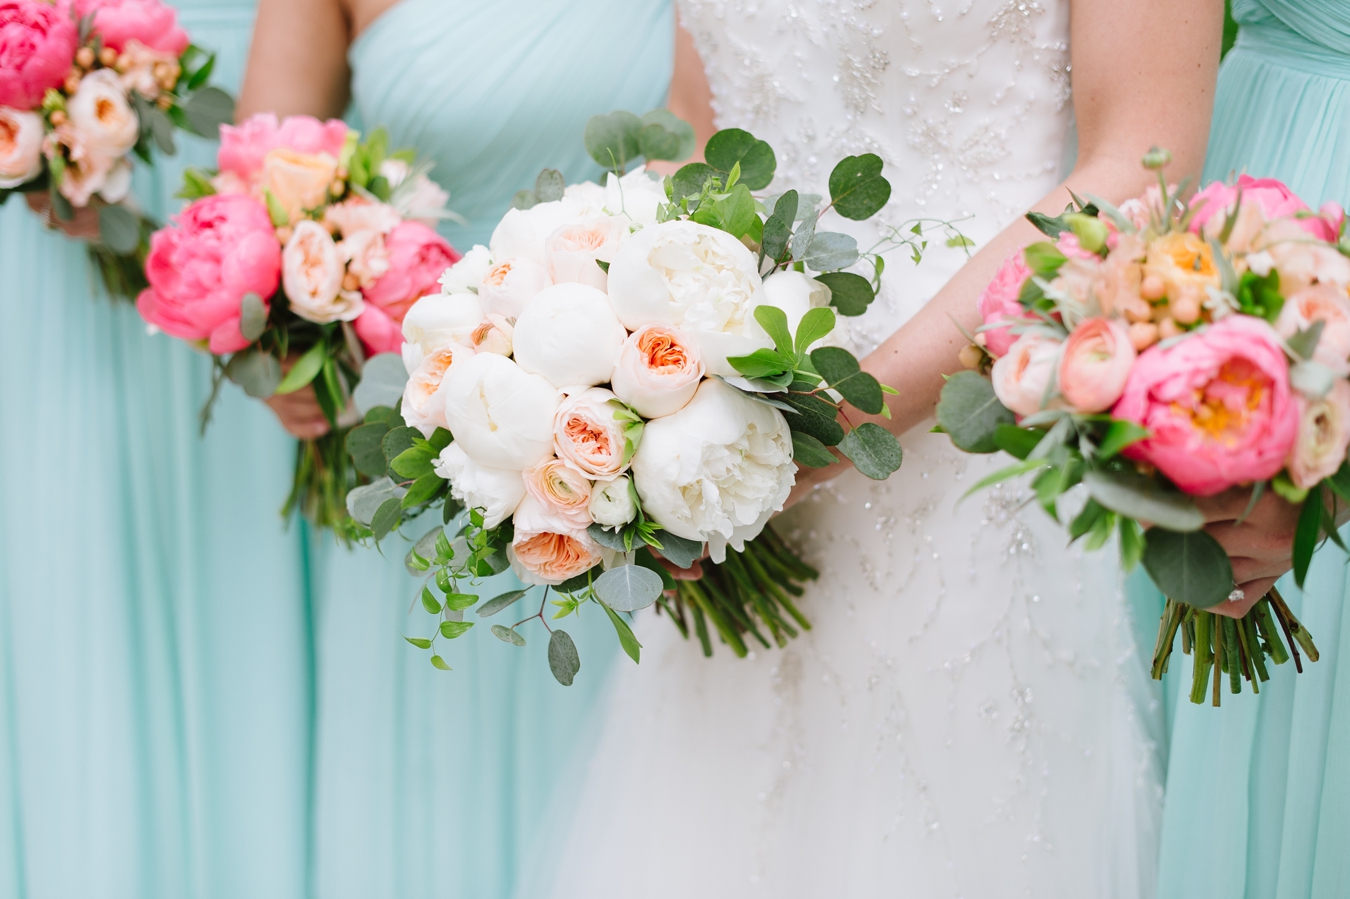 Teal J.Crew Bridesmaids Dresses and Romantic Peony Bouquets  | Natalie Franke Photography